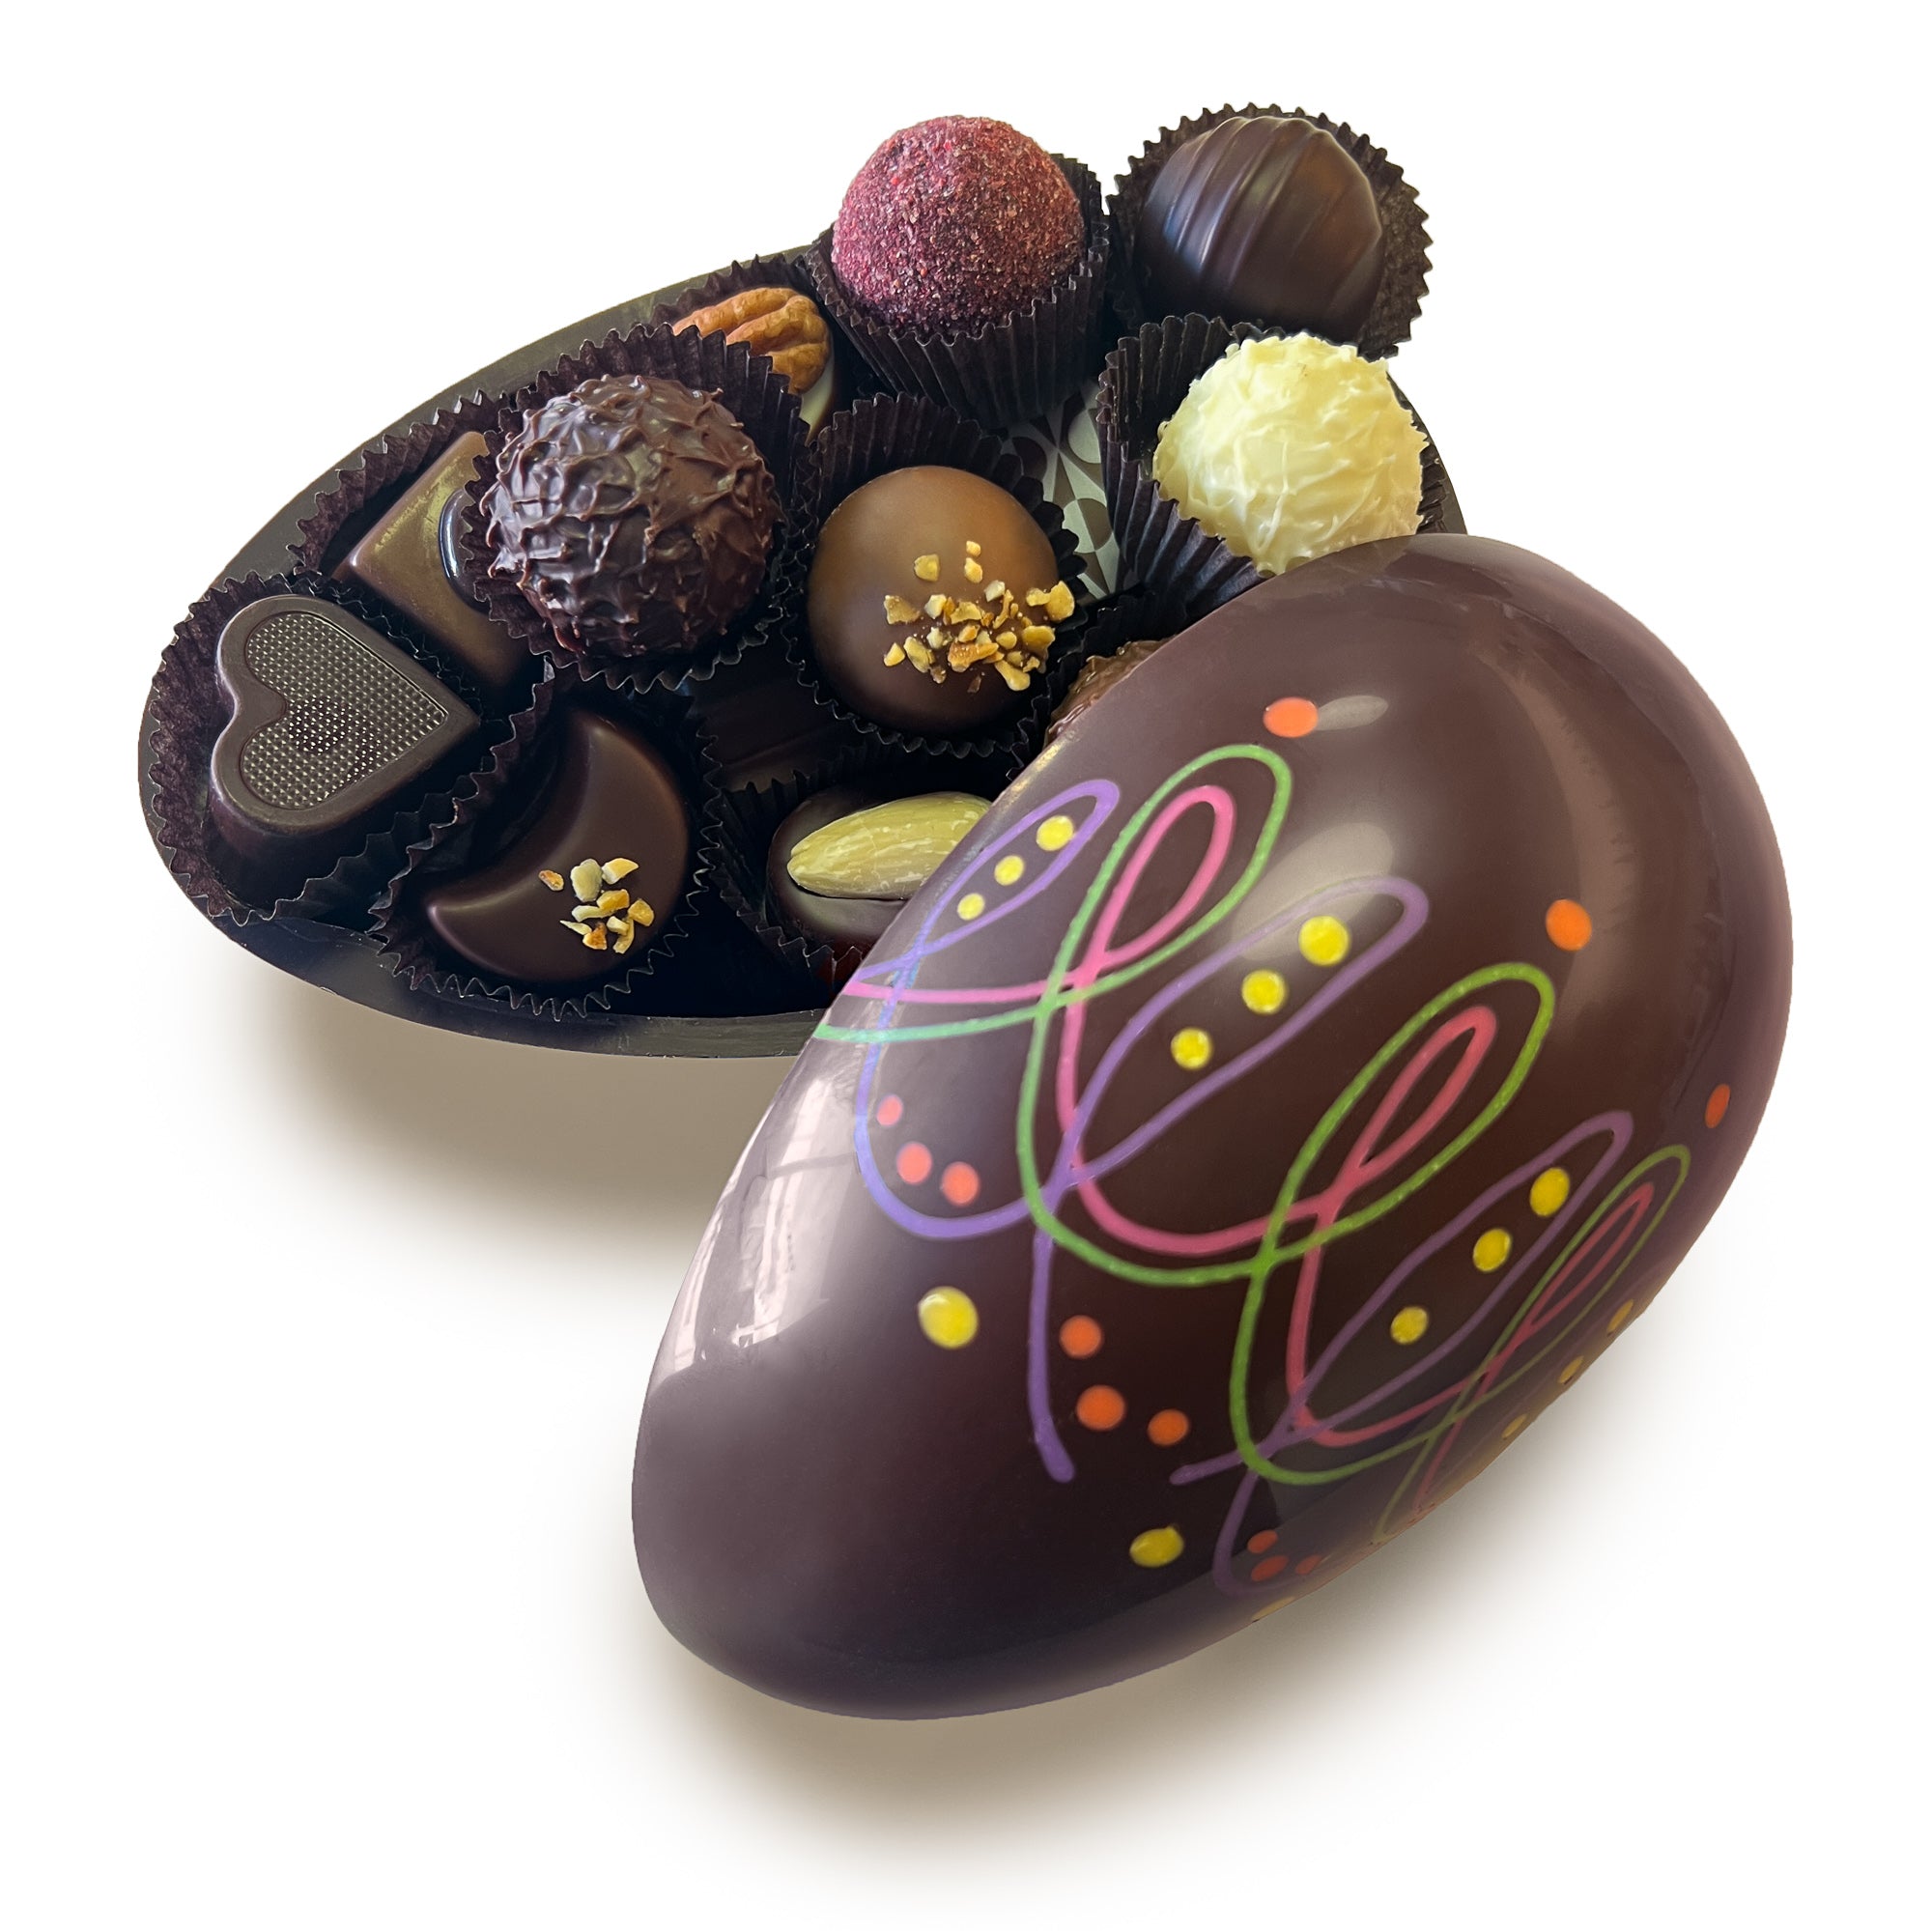 Chocolate Candy-Filled Egg